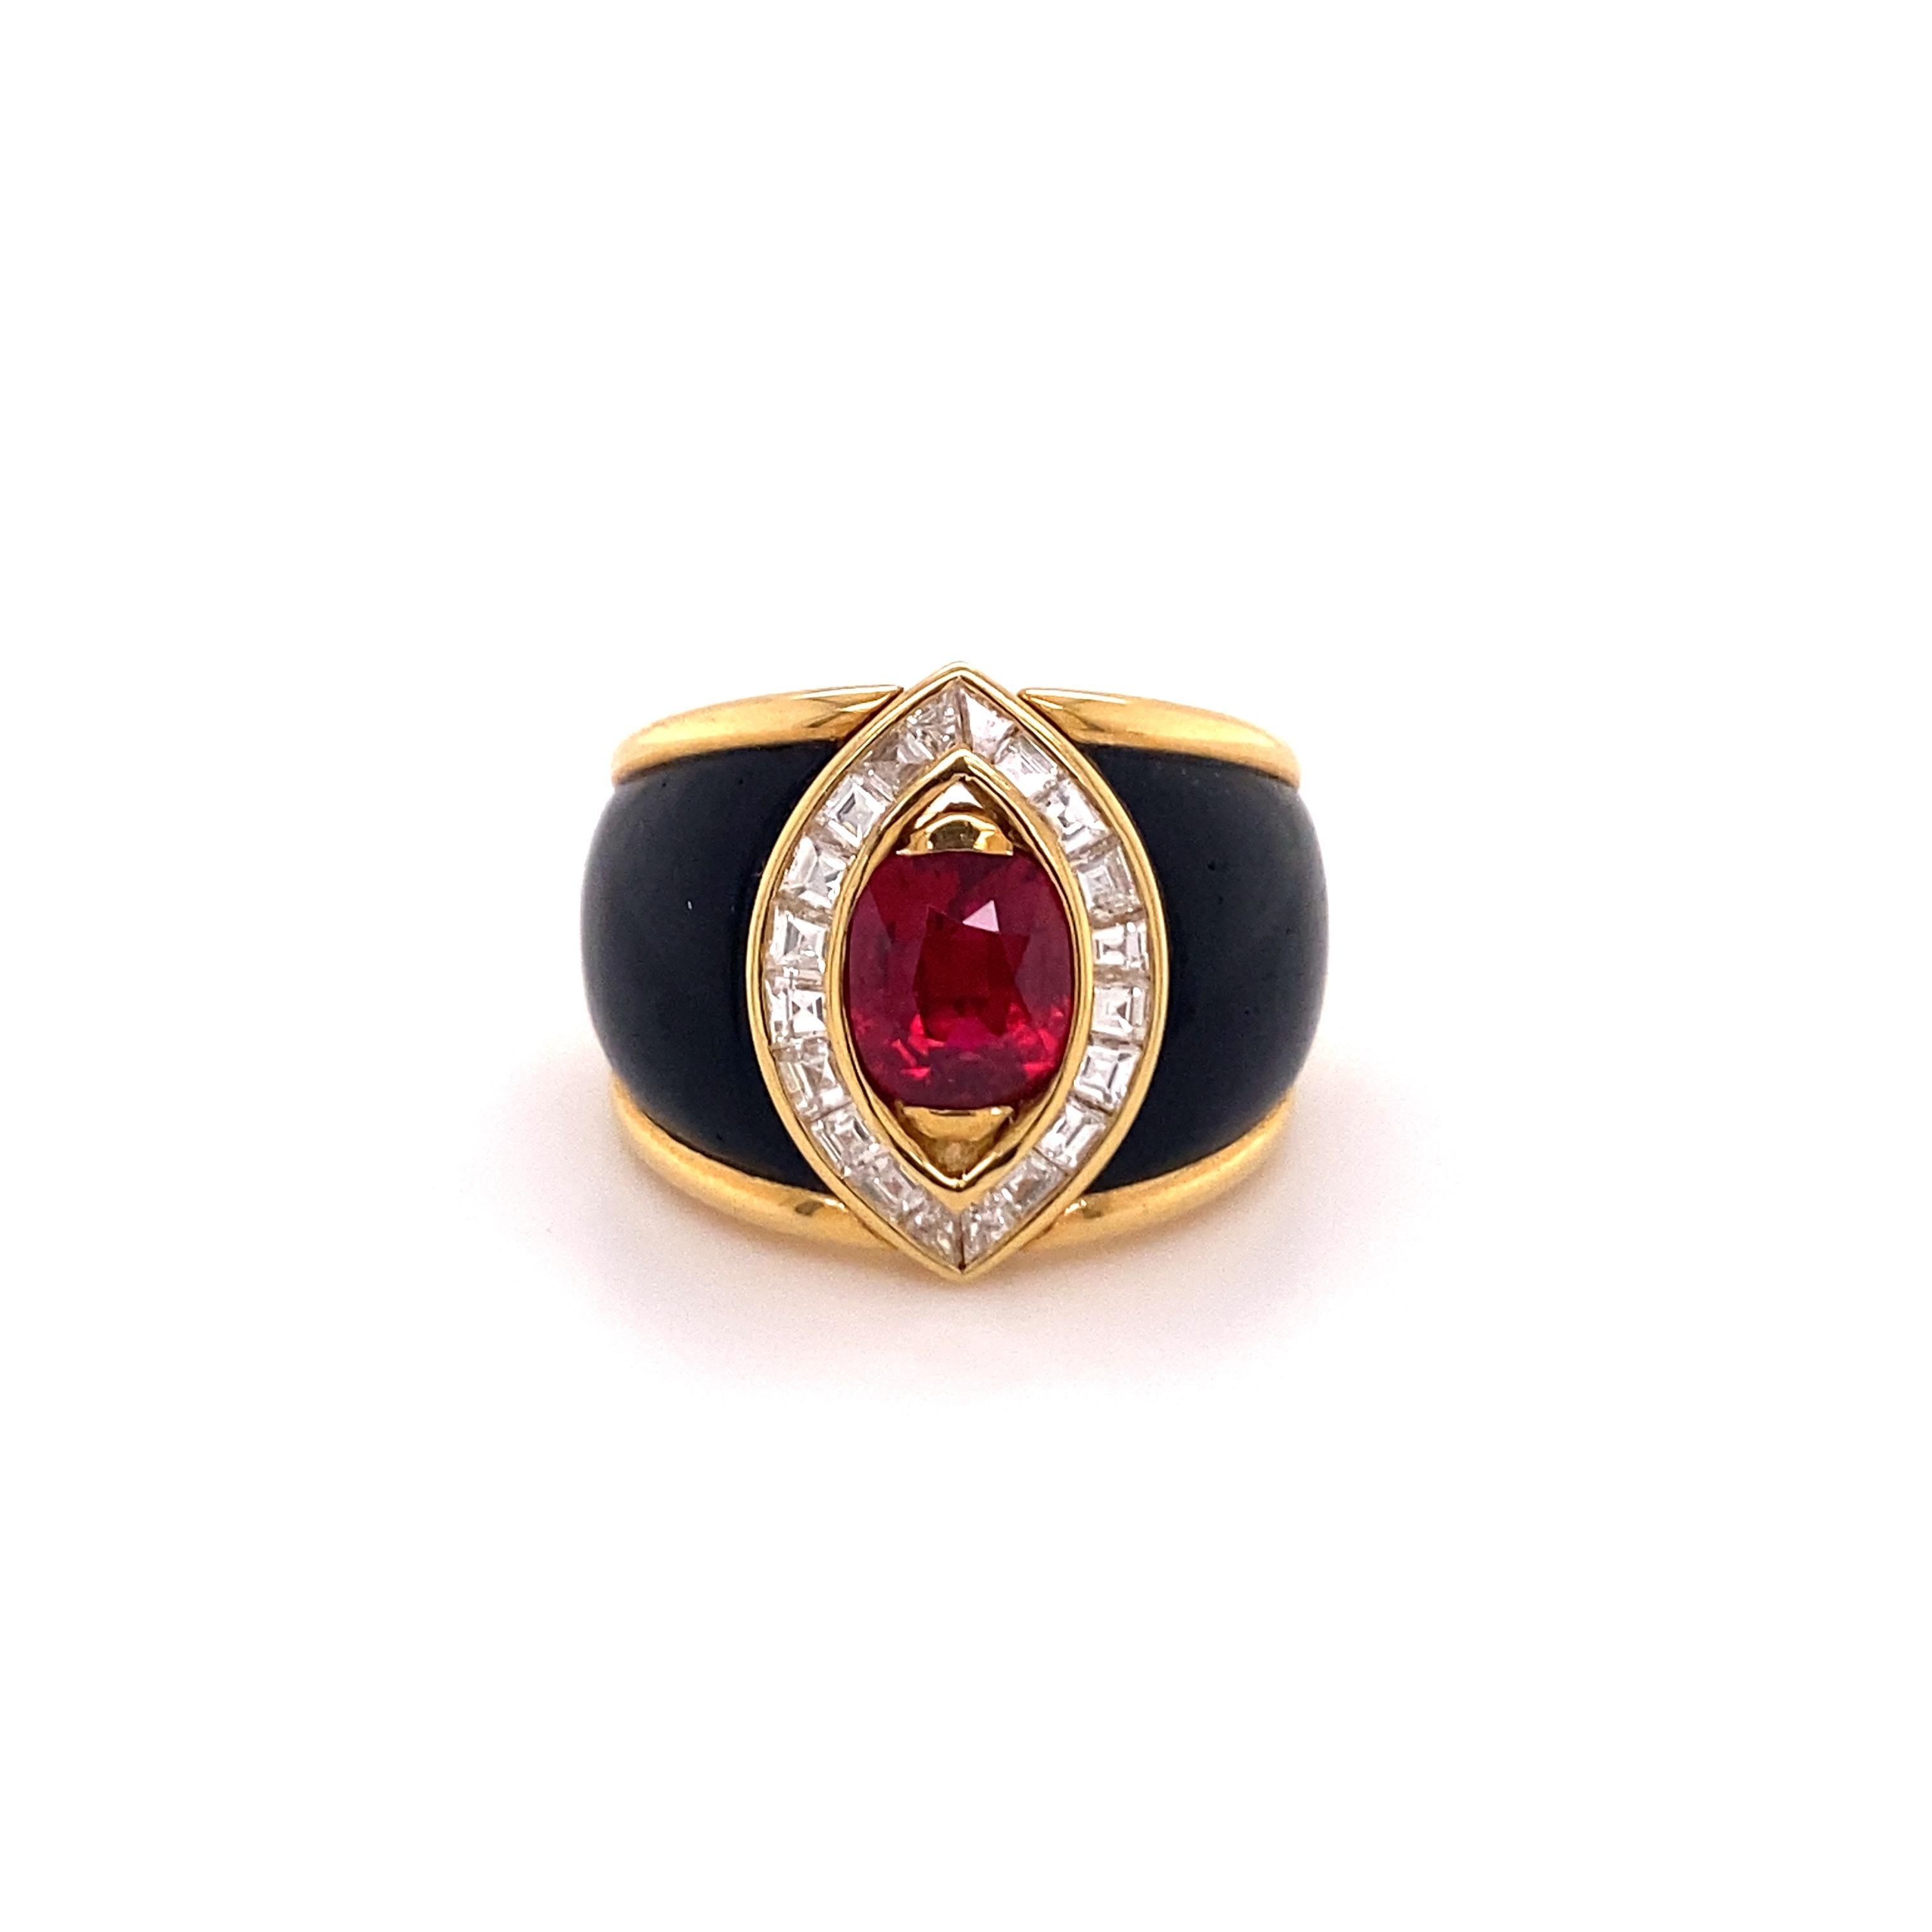 This bold and contrasting ring by renowned swiss jeweller Péclard is set with a fiery cushion-shaped ruby of approximately 2.10 carats. The ruby is of Thai origin and heated. The navette-shaped entourage is set with 20 precisely cut and sparkling